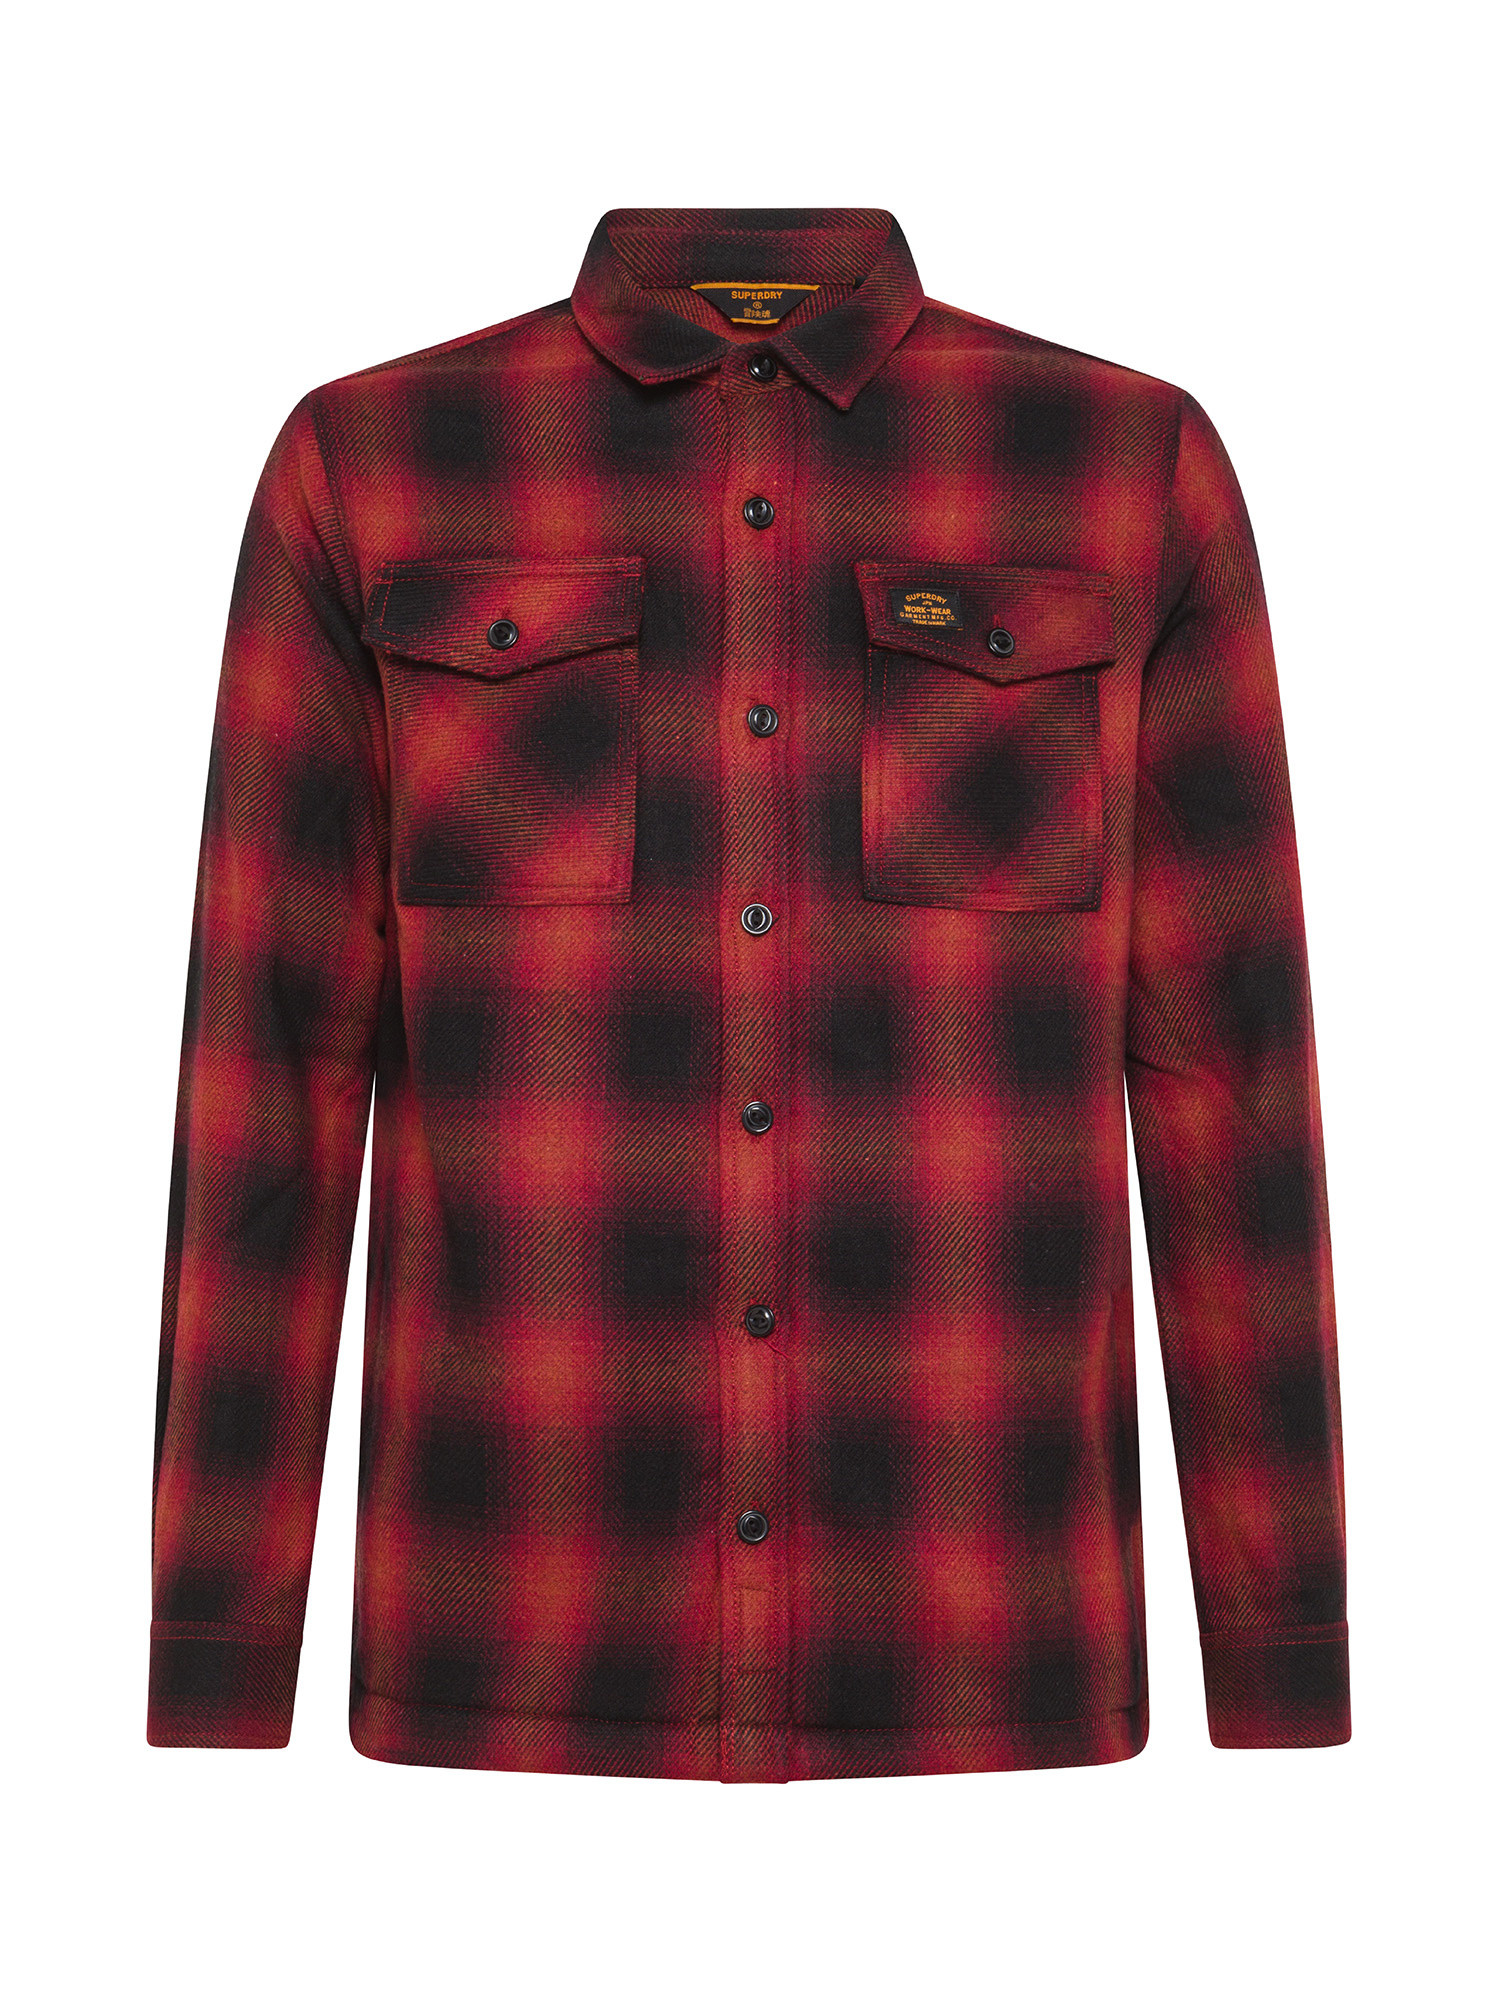 Superdry - Camicia foderata in sherpa, Rosso, large image number 0